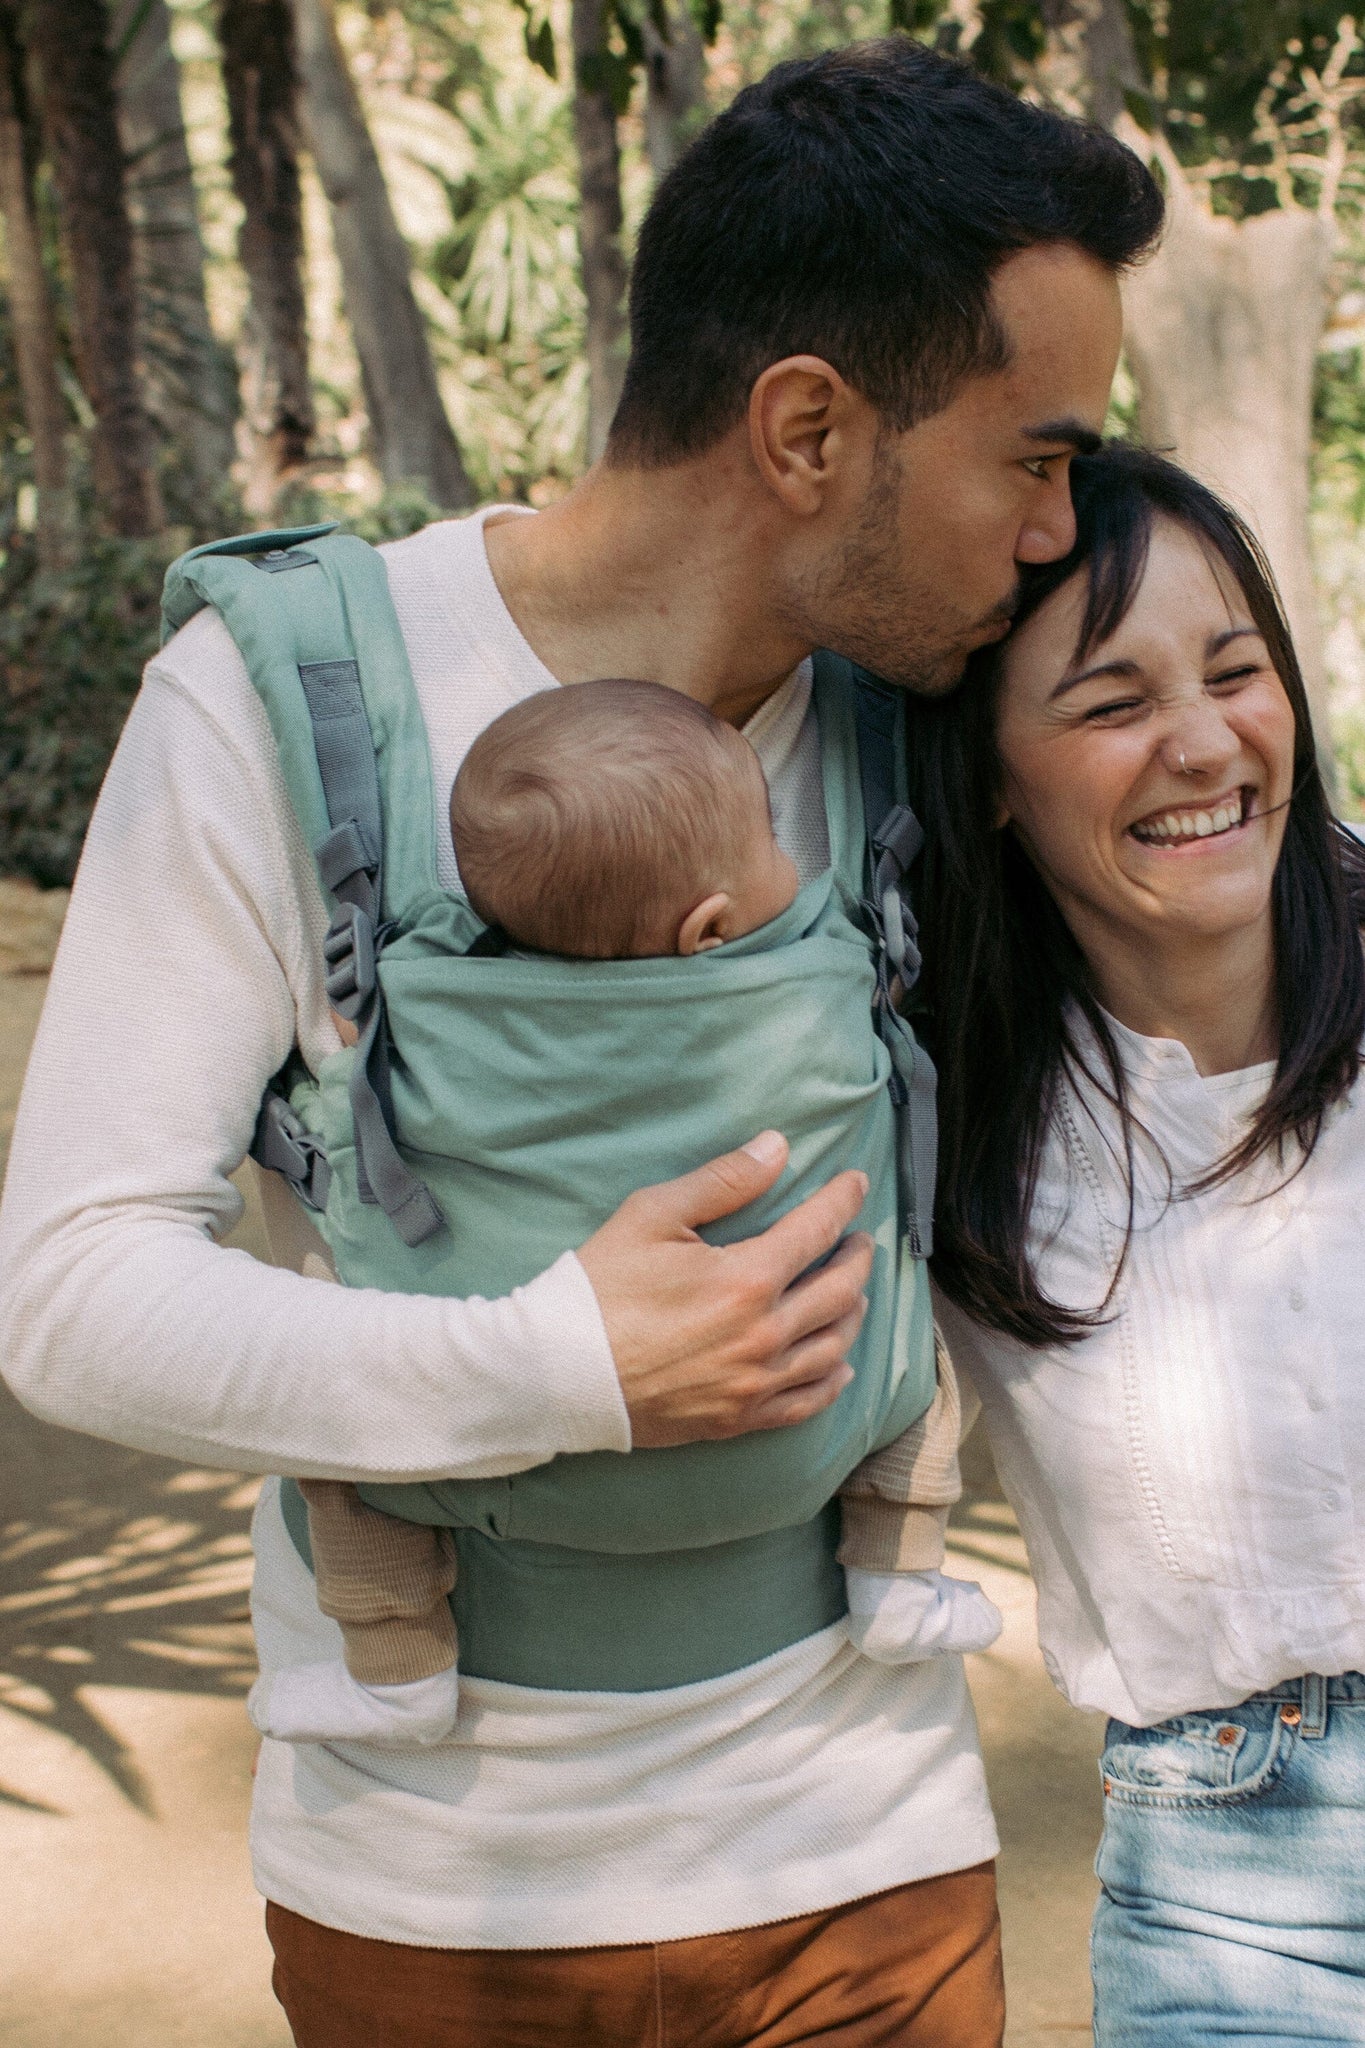 With an intuitive design that regulates in width and height, the Boba X Baby Carrier is a versatile and fully adjustable carrier that will truly grow with your baby.